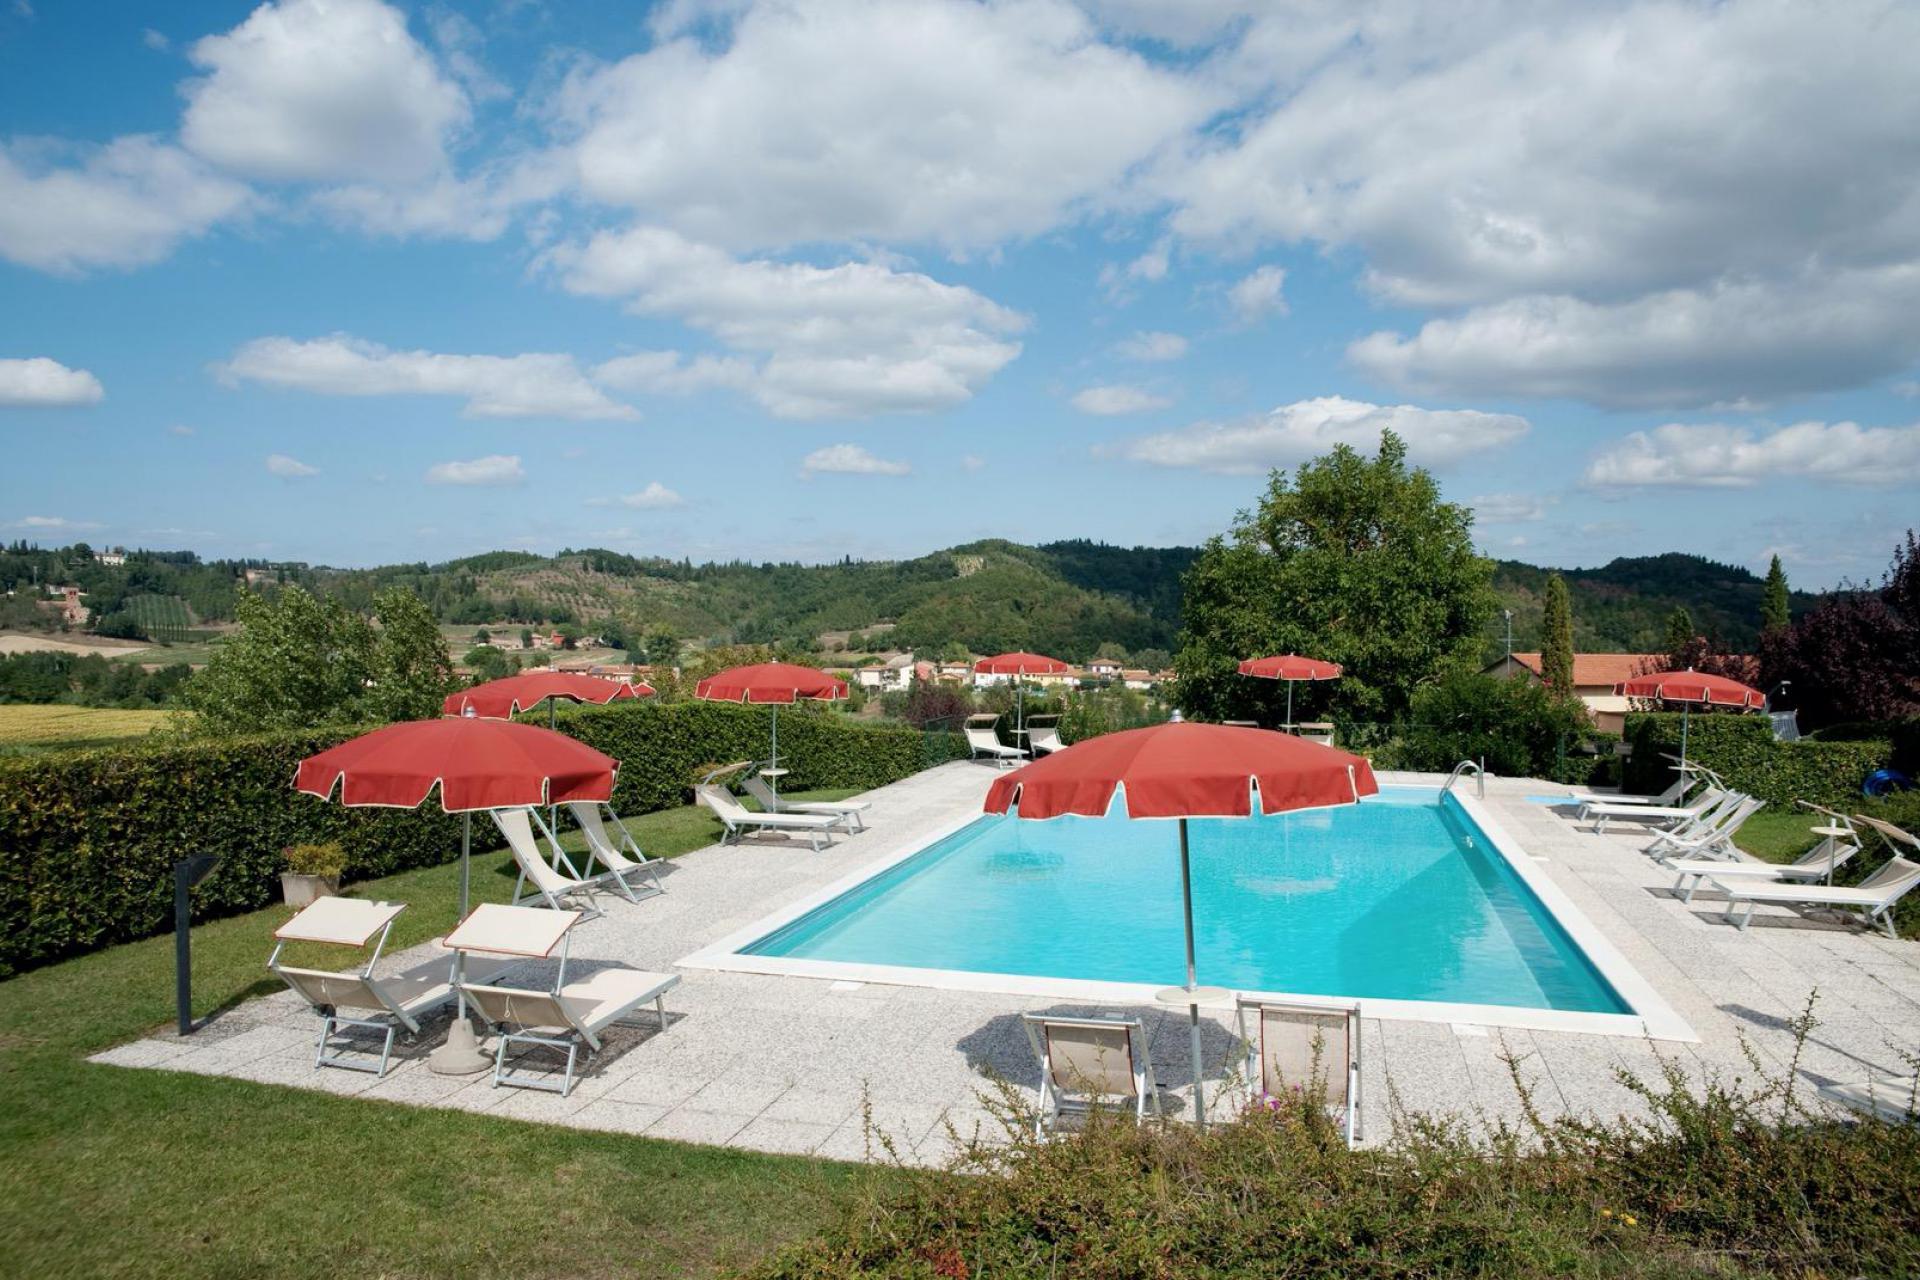 Agriturismo Tuscany Agriturismo for families with large pool and paddling pool